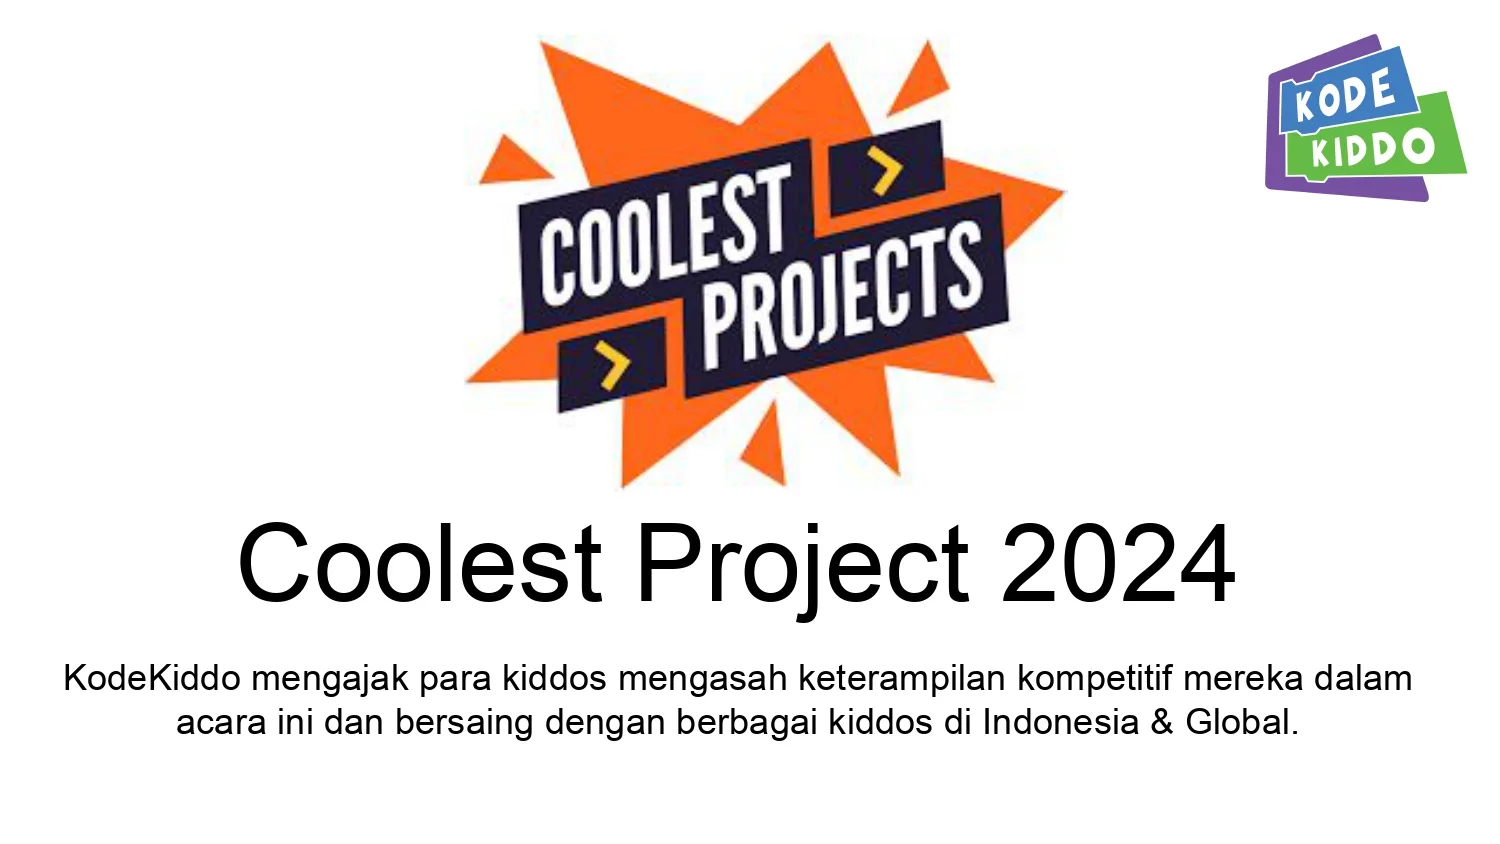 Materi-Webinar-Coolest-Projects-Coding-Olympics-2024_pages-to-jpg-0002-jpg